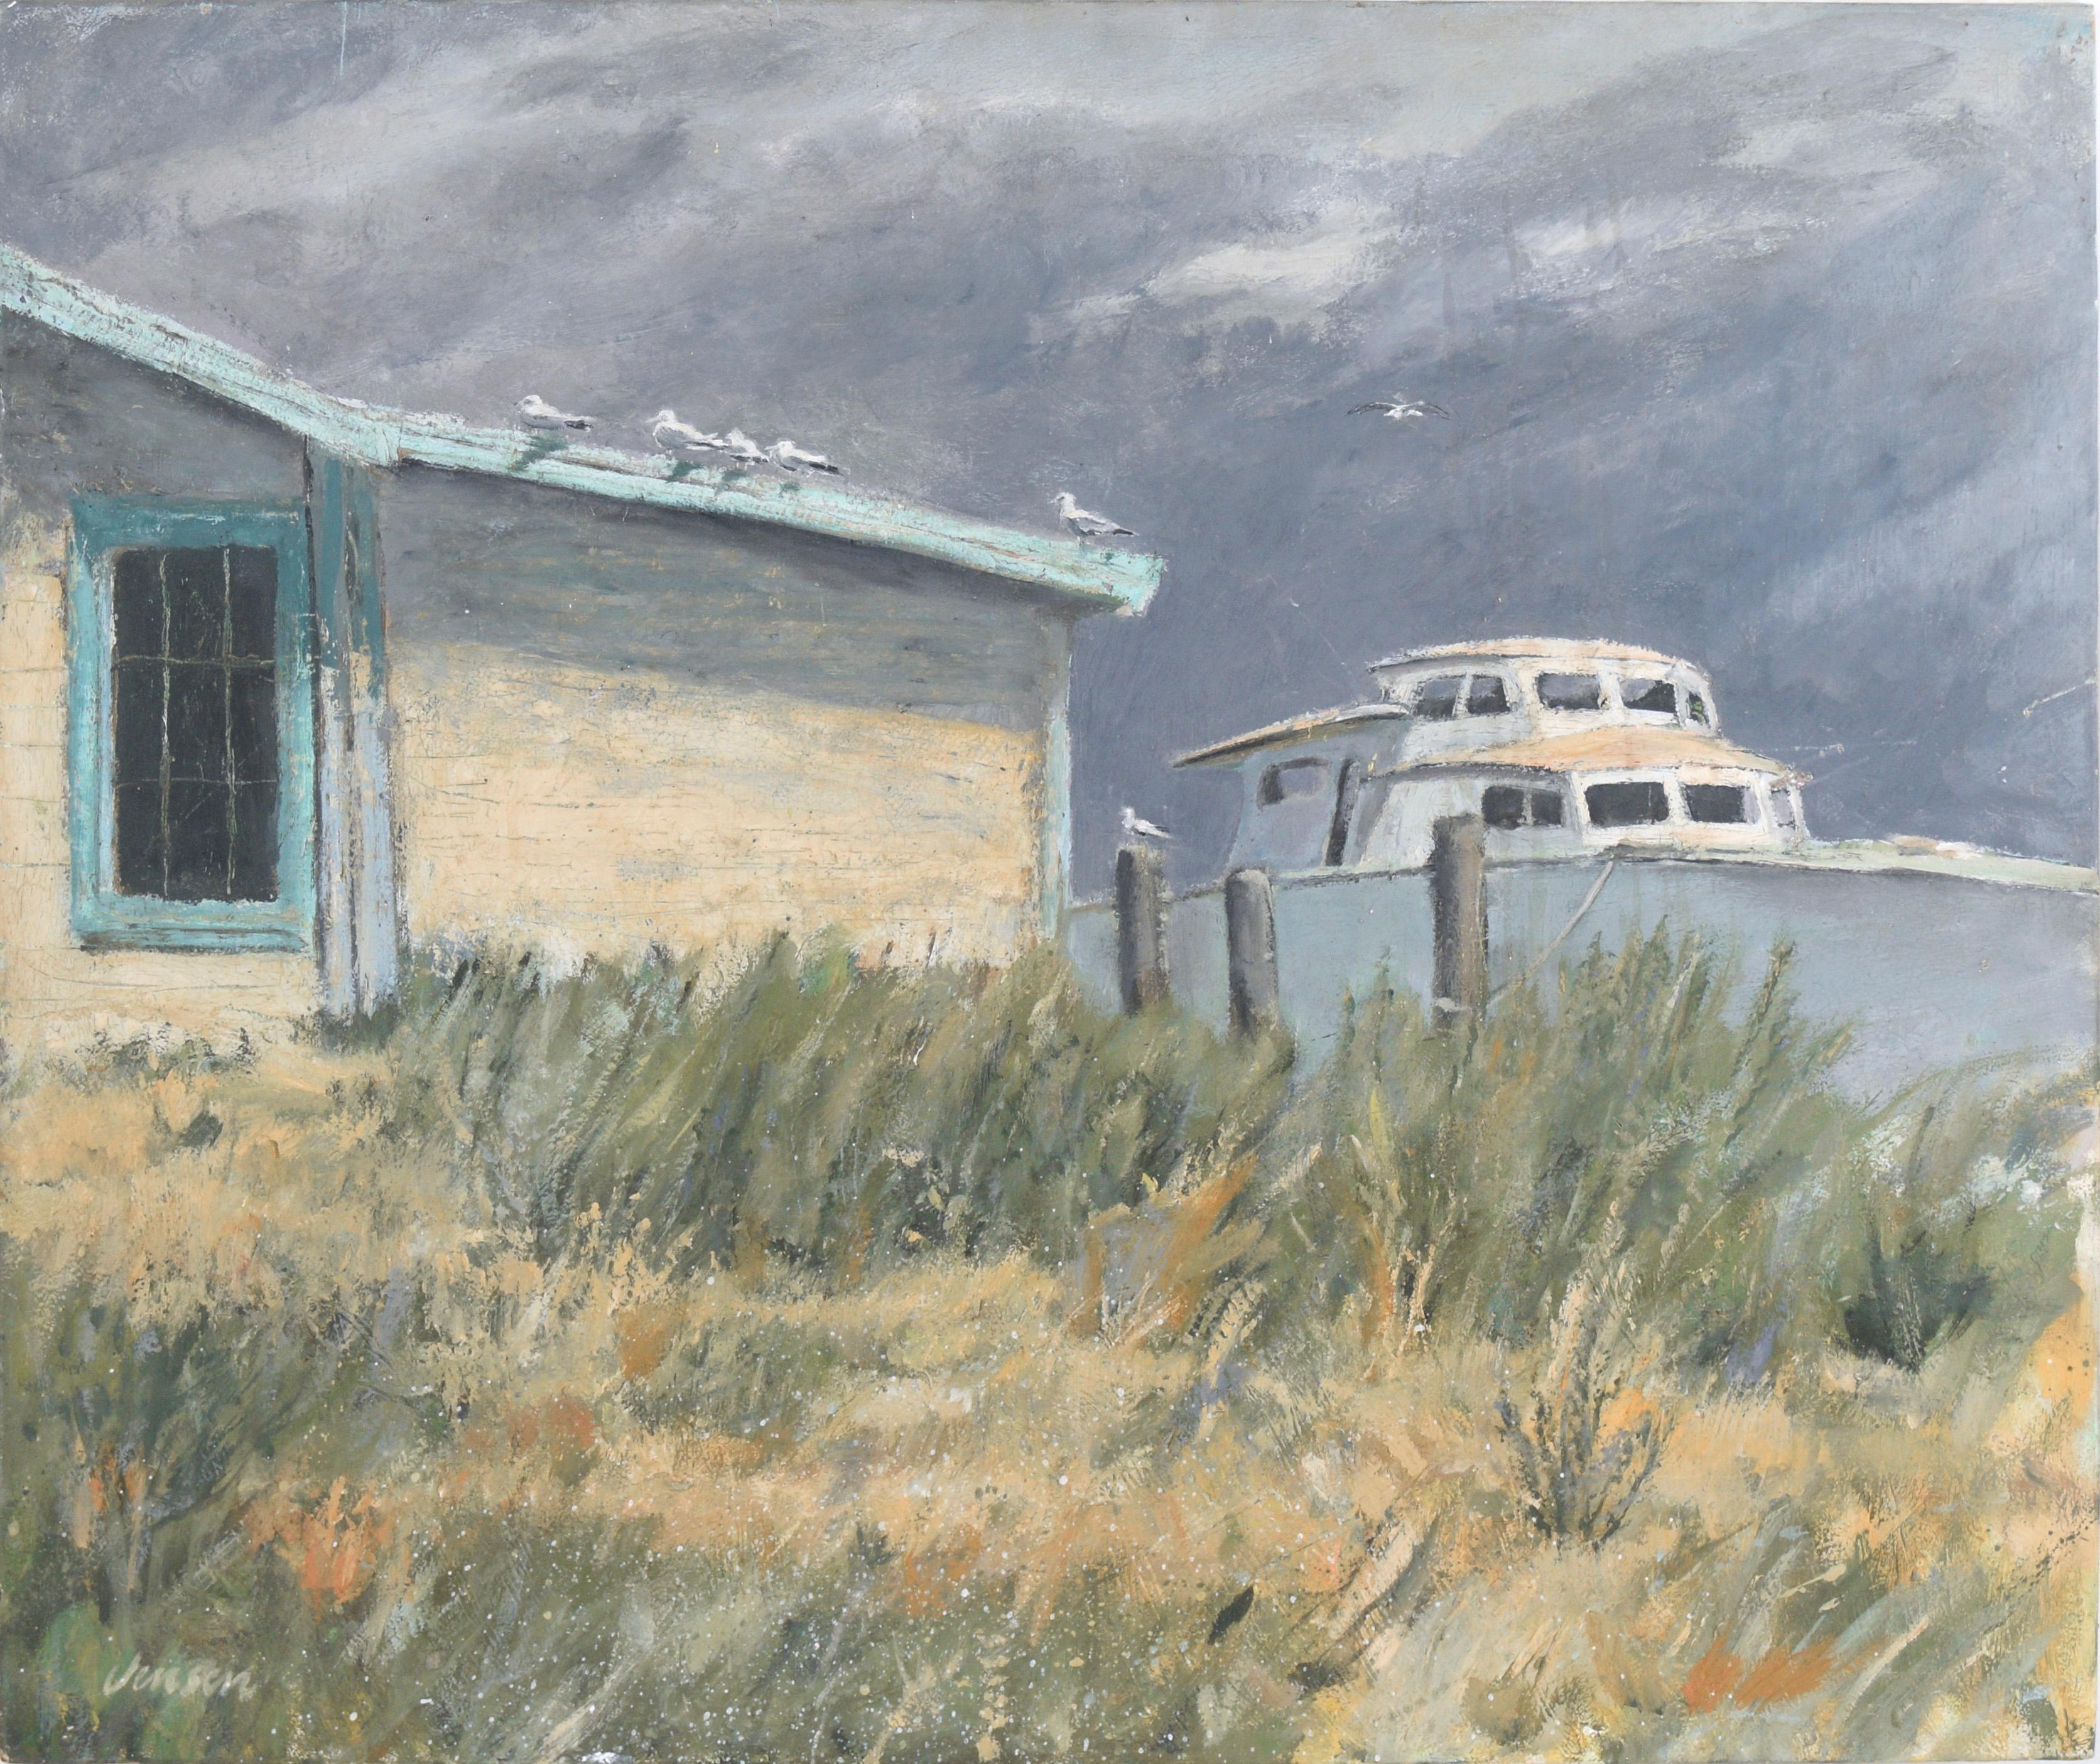 Ship and  Boathouse with seagulls - Coastal Landscape Oil on Masonite by Jensen - Painting by Unknown